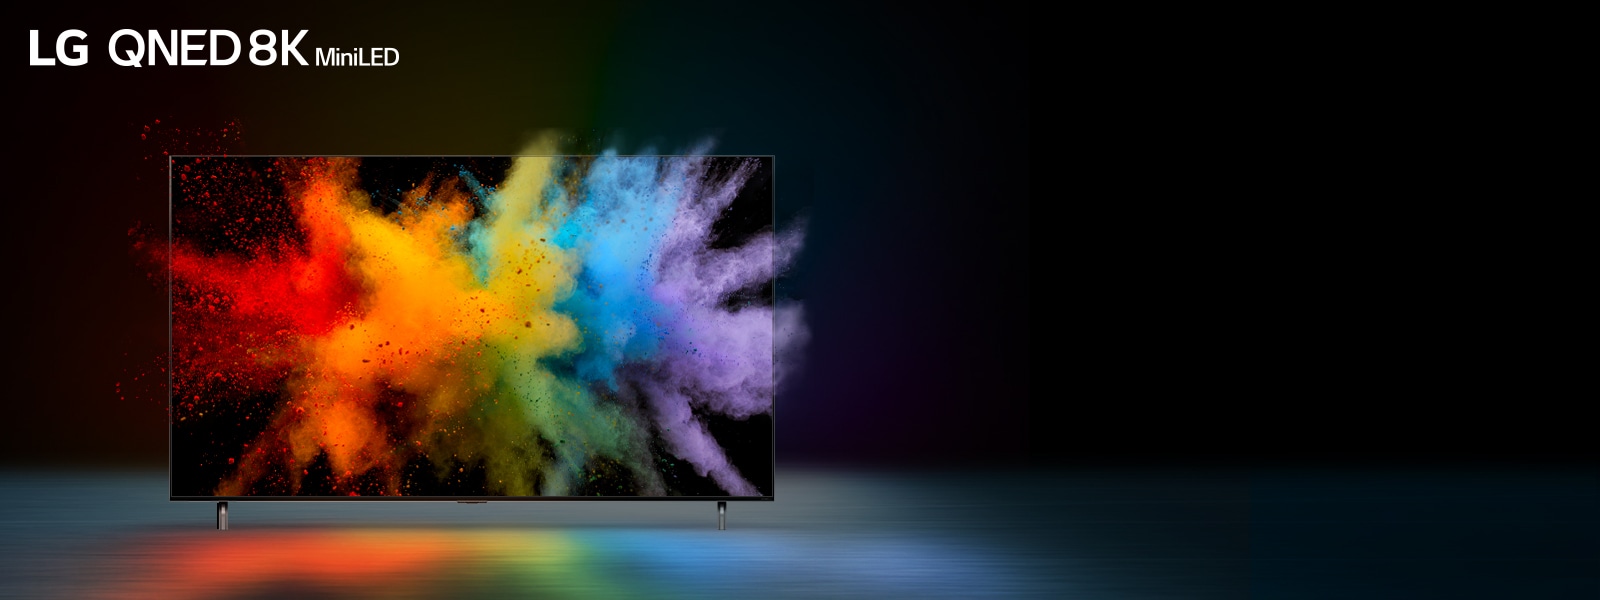 TV is placed in black space. The color powder explodes within TV monitor. 